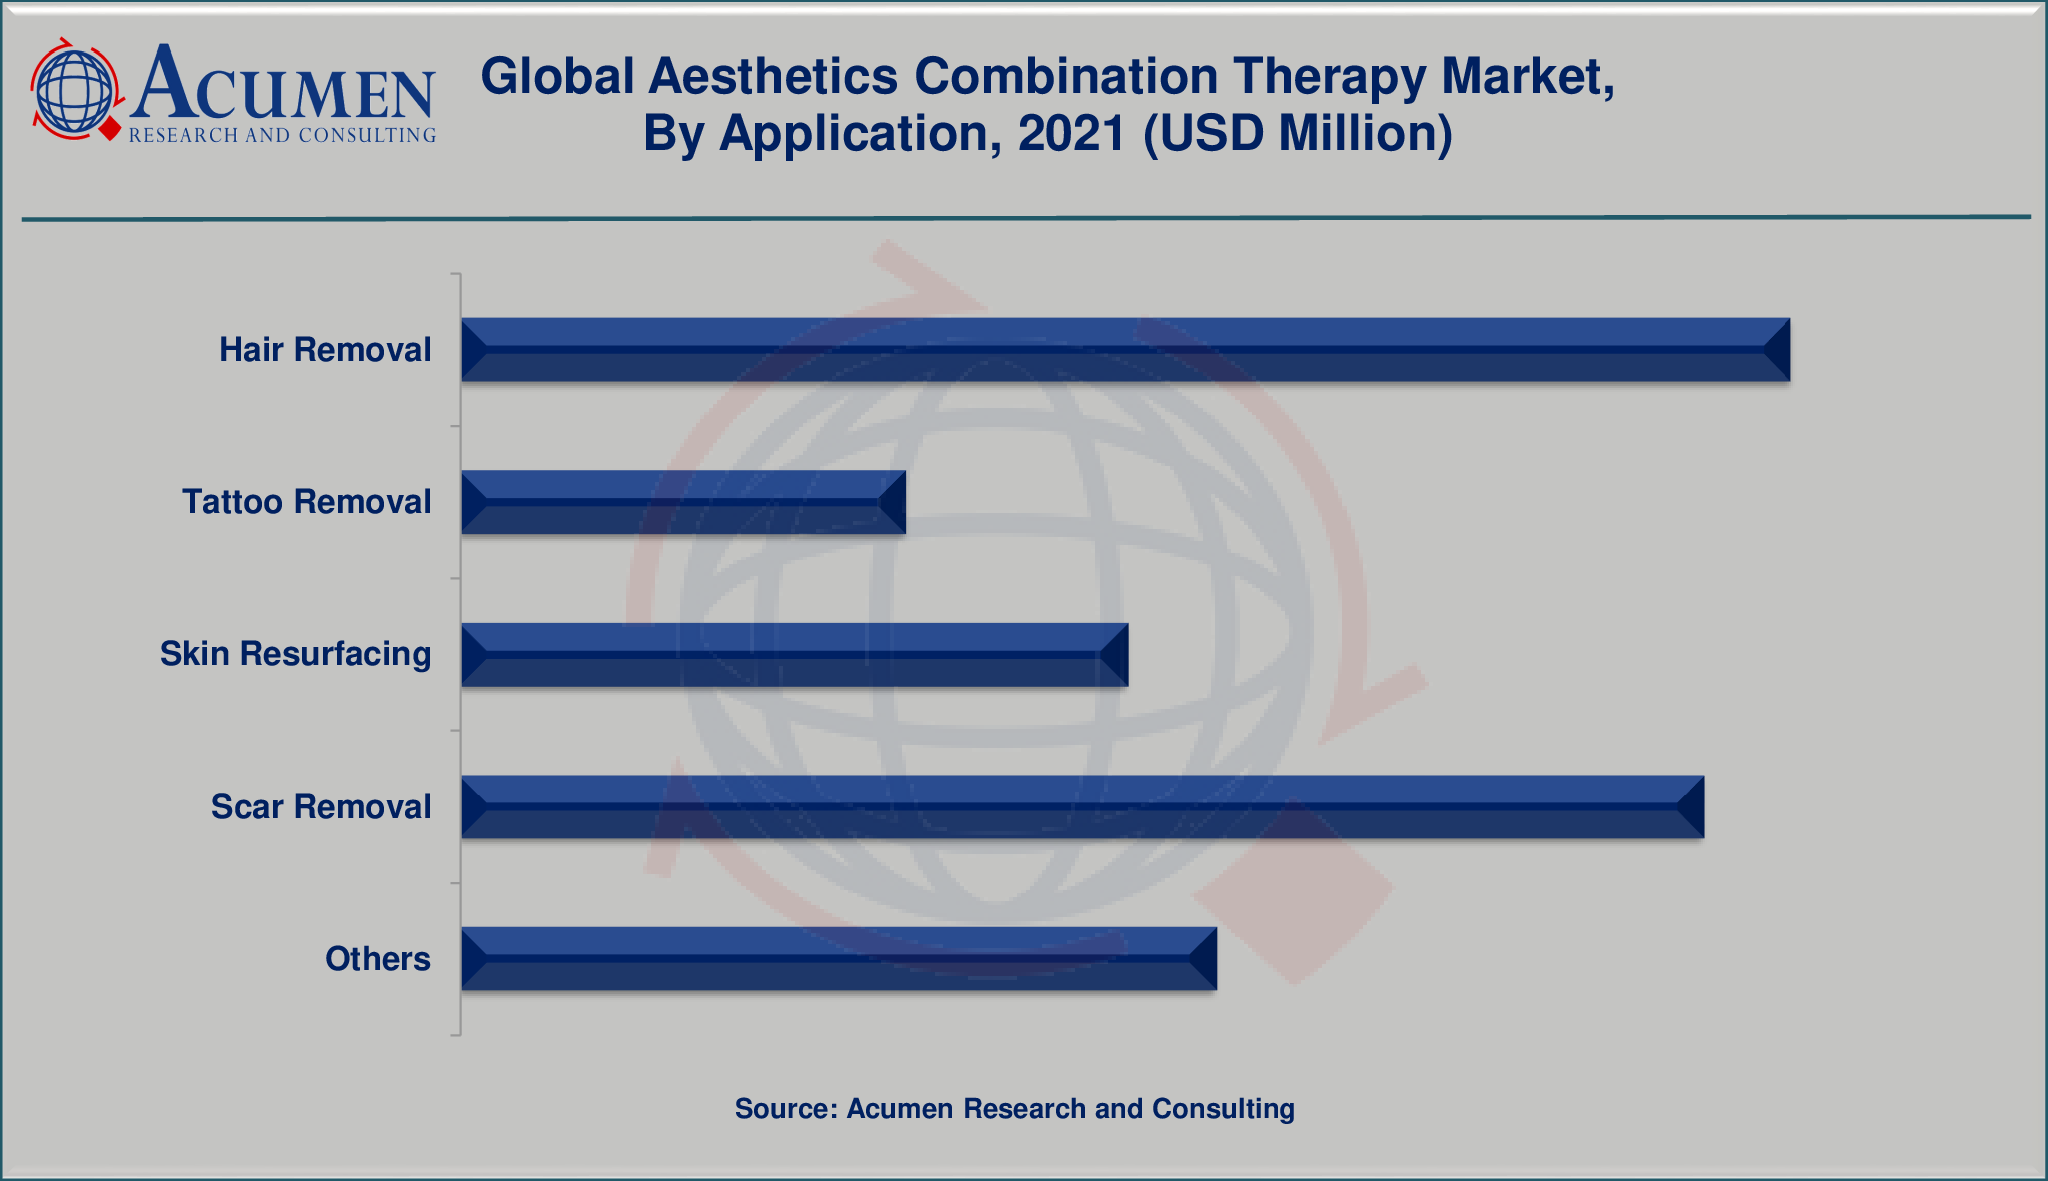 Aesthetics Combination Therapy Market By Application will achieve a market size of USD 6,168 Million by 2030, budding at a CAGR of 8.2%